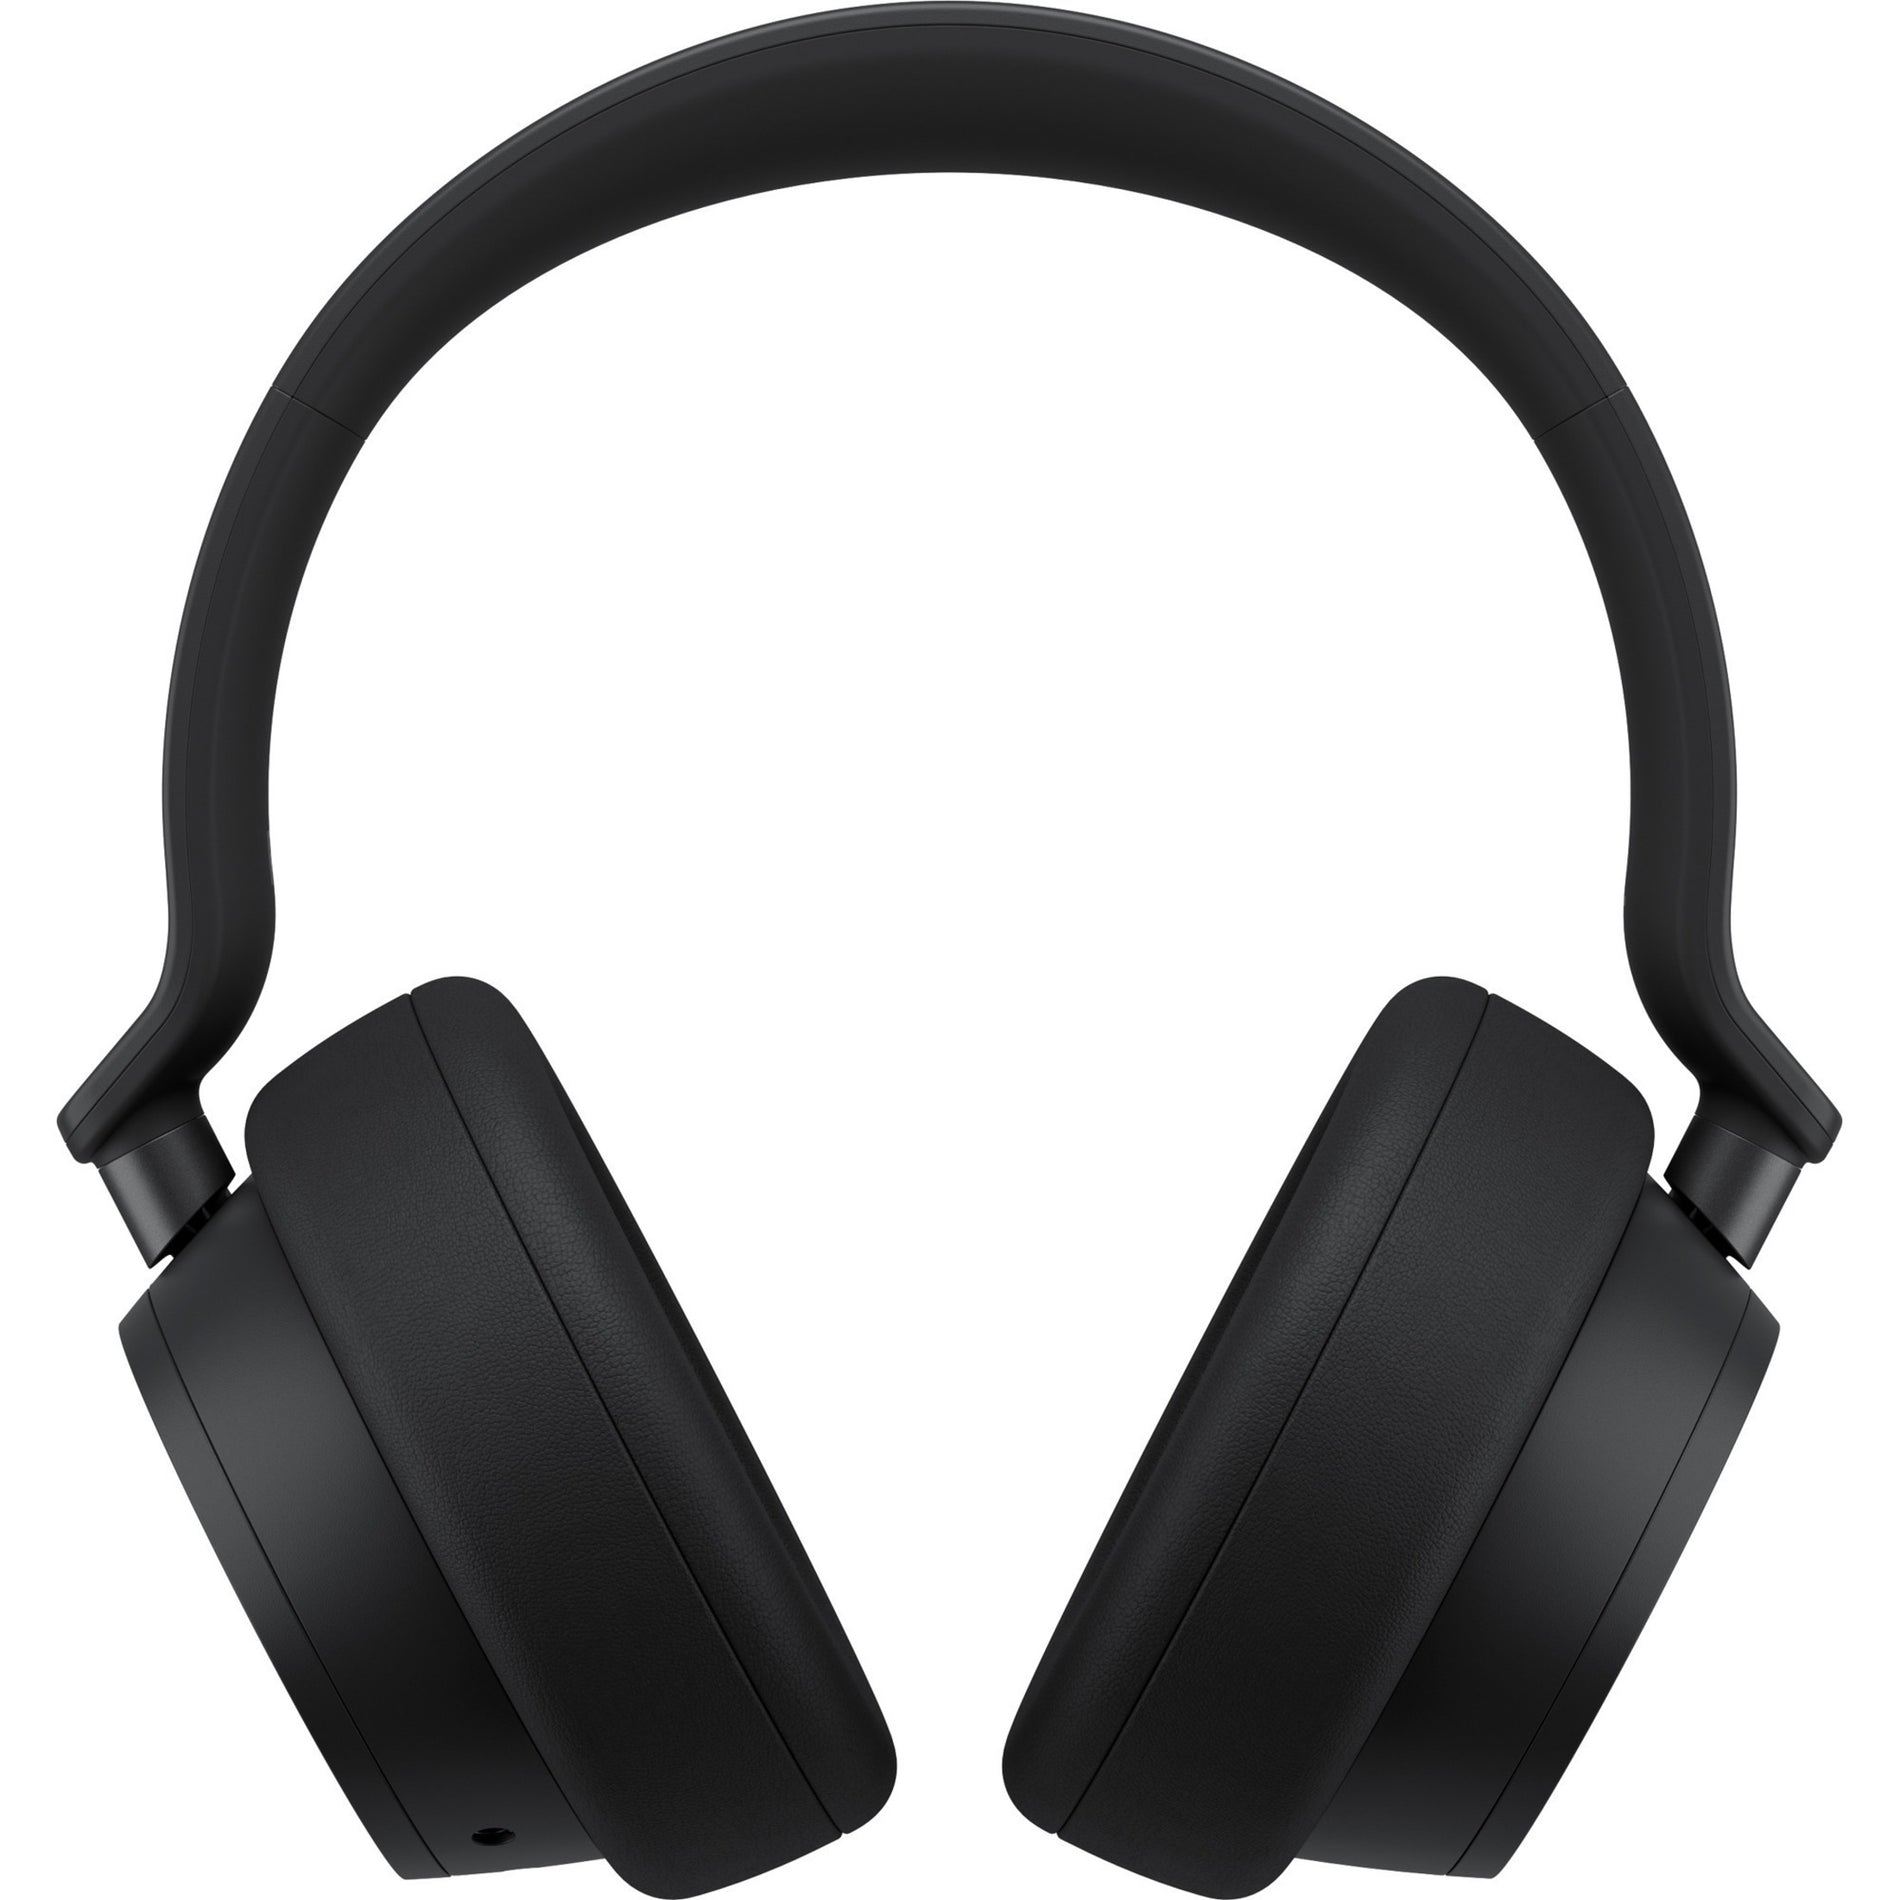 Microsoft 3BS-00001 Surface Headphones 2+ for Business, Over-the-head, Active Noise Canceling, Wireless Bluetooth Headset